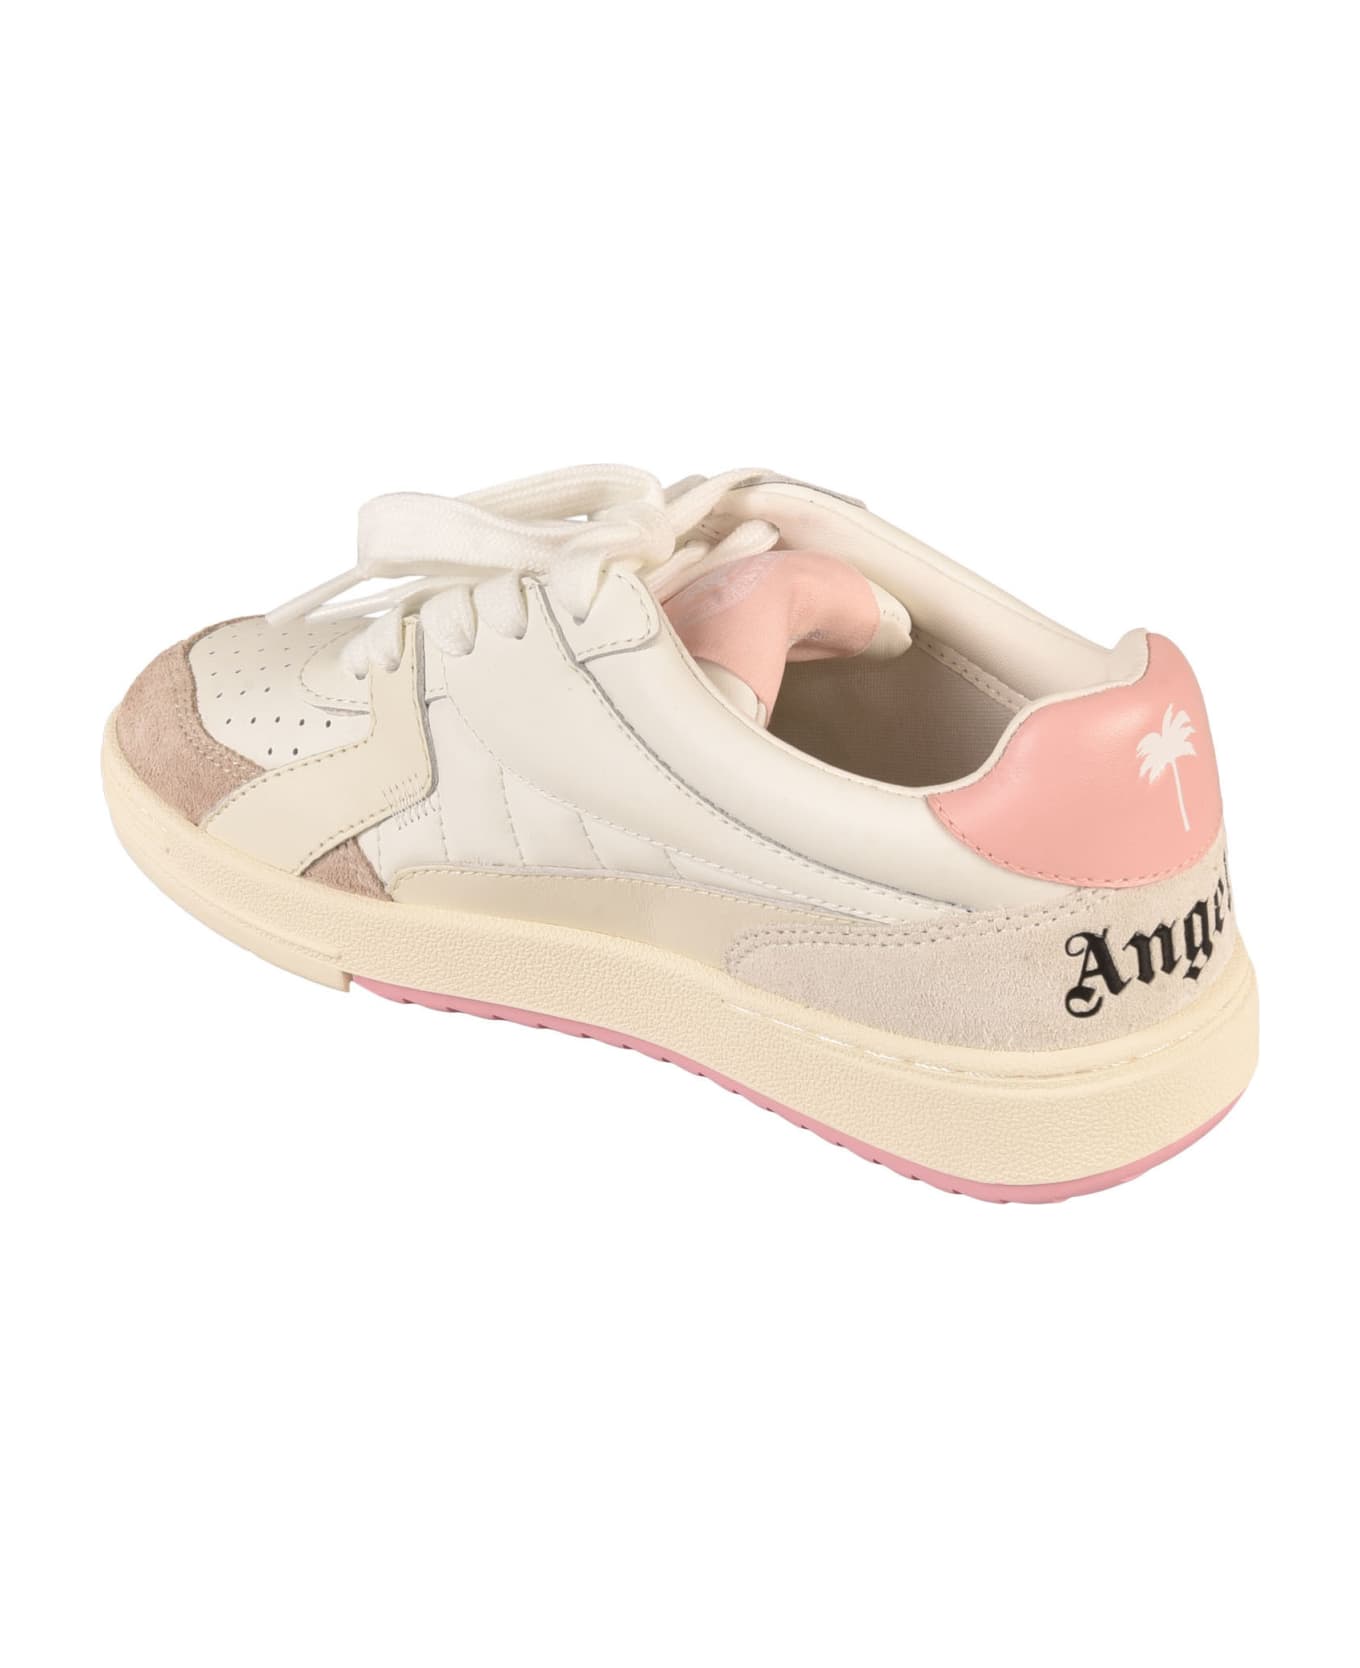 Palm Angels Multicolor Leather Palm University Sneakers - White/Pink